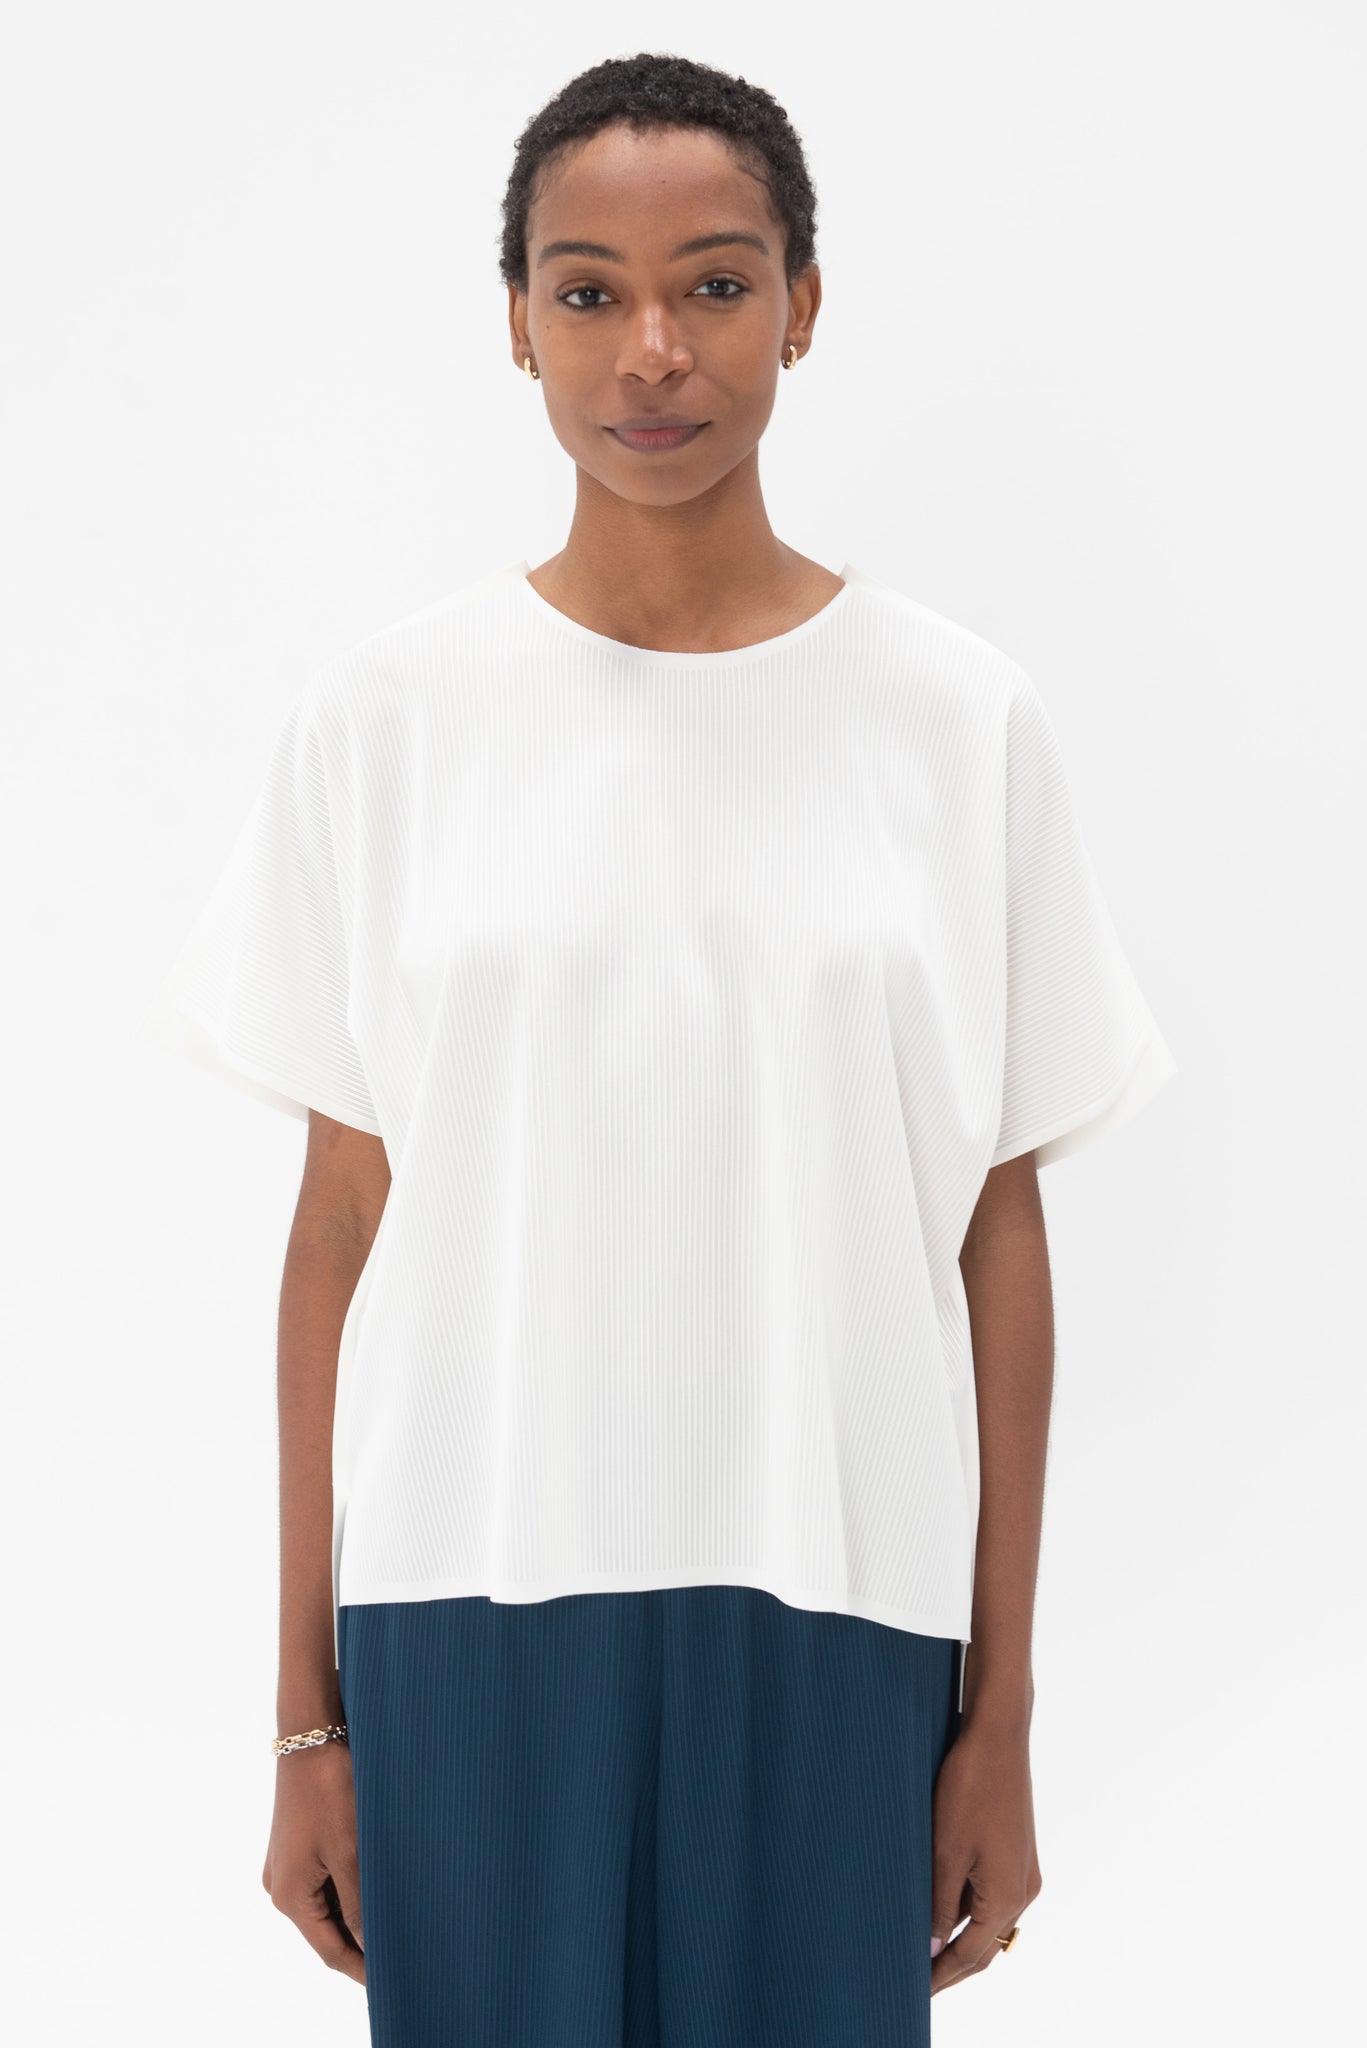 Pleats Please by Issey Miyake - A-Poc From Top, Off White